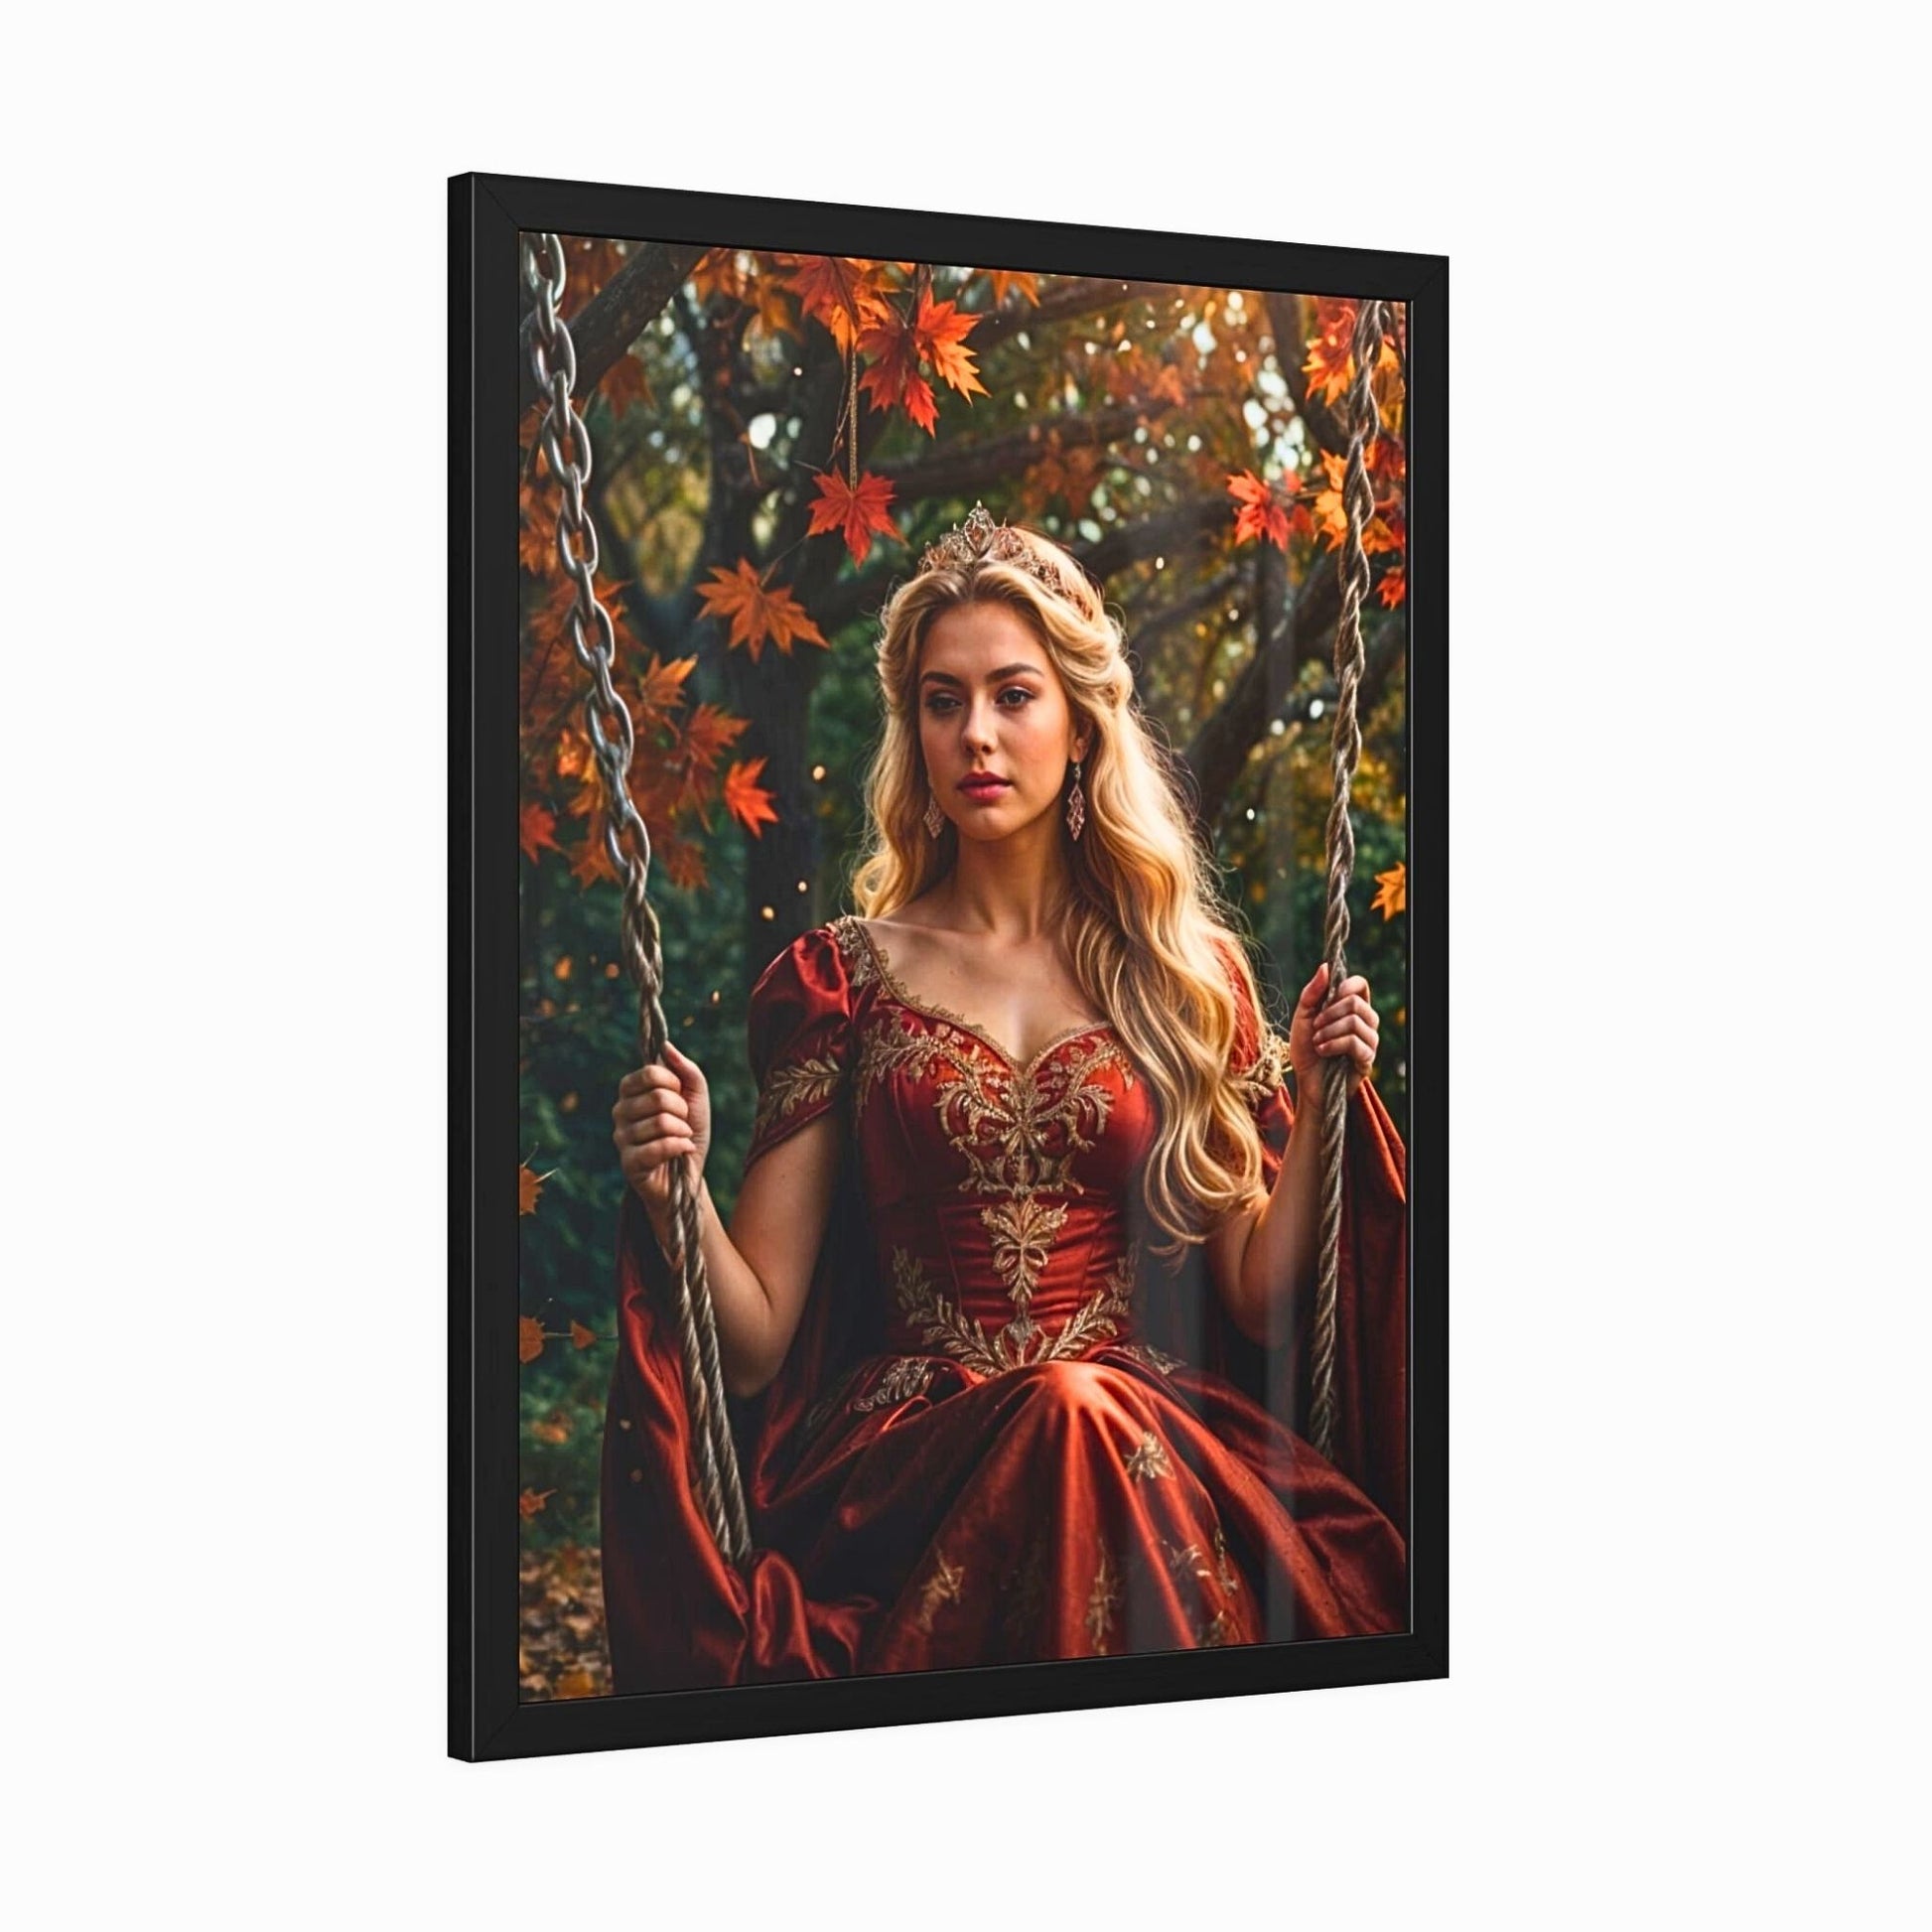 Transform your favorite photo into a stunning Renaissance portrait fit for royalty! Ideal for those seeking a distinctive birthday gift or a custom queen portrait. This personalized royal queen with sword portrait combines historical charm with a touch of elegance. Perfect for celebrating her special day or as a thoughtful gift for any occasion. Capture her essence with this unique and timeless custom woman portrait.